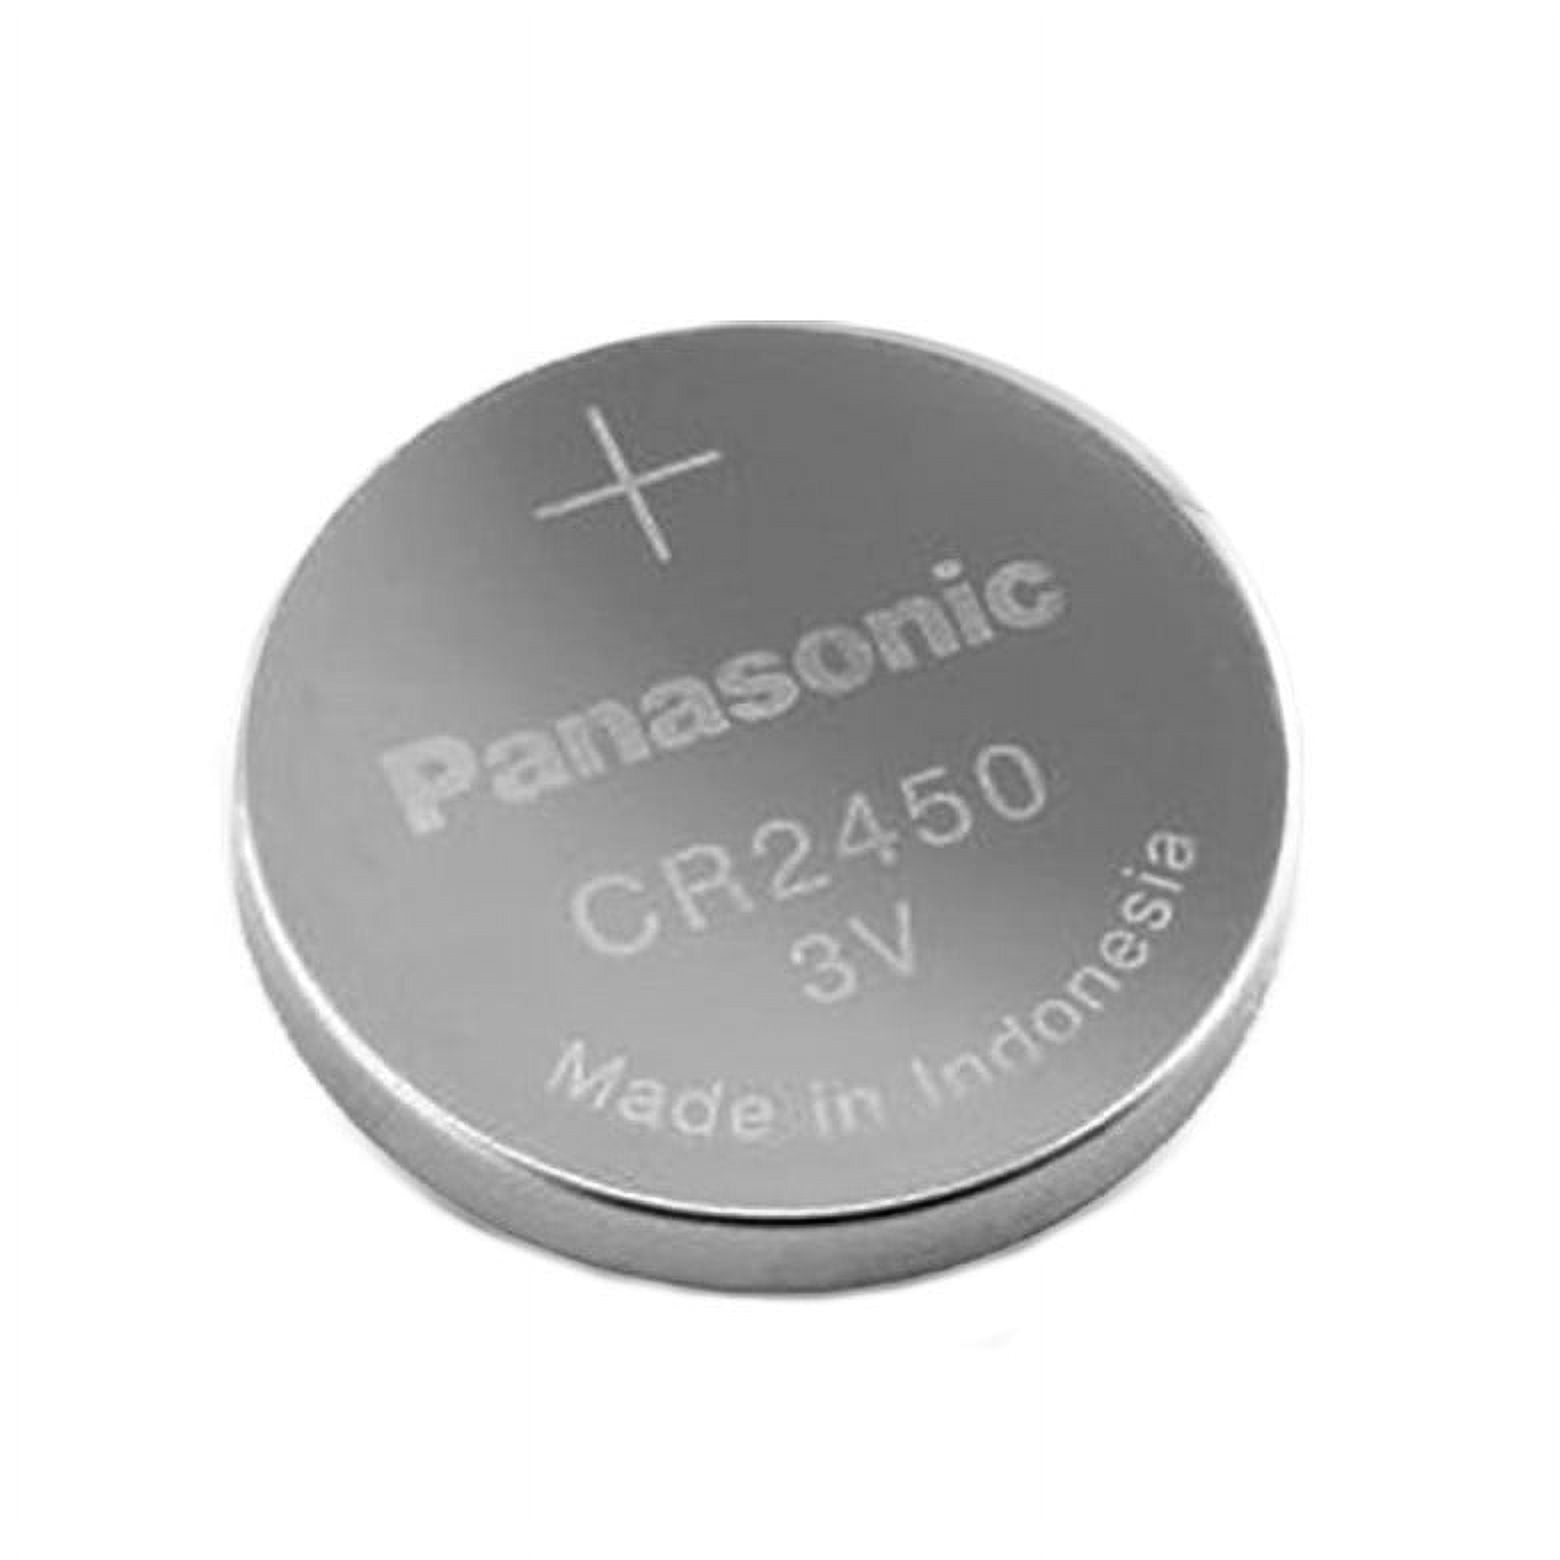 Panasonic CR-2450/5BE Lithium Coin Battery, Non Rechargeable at Rs